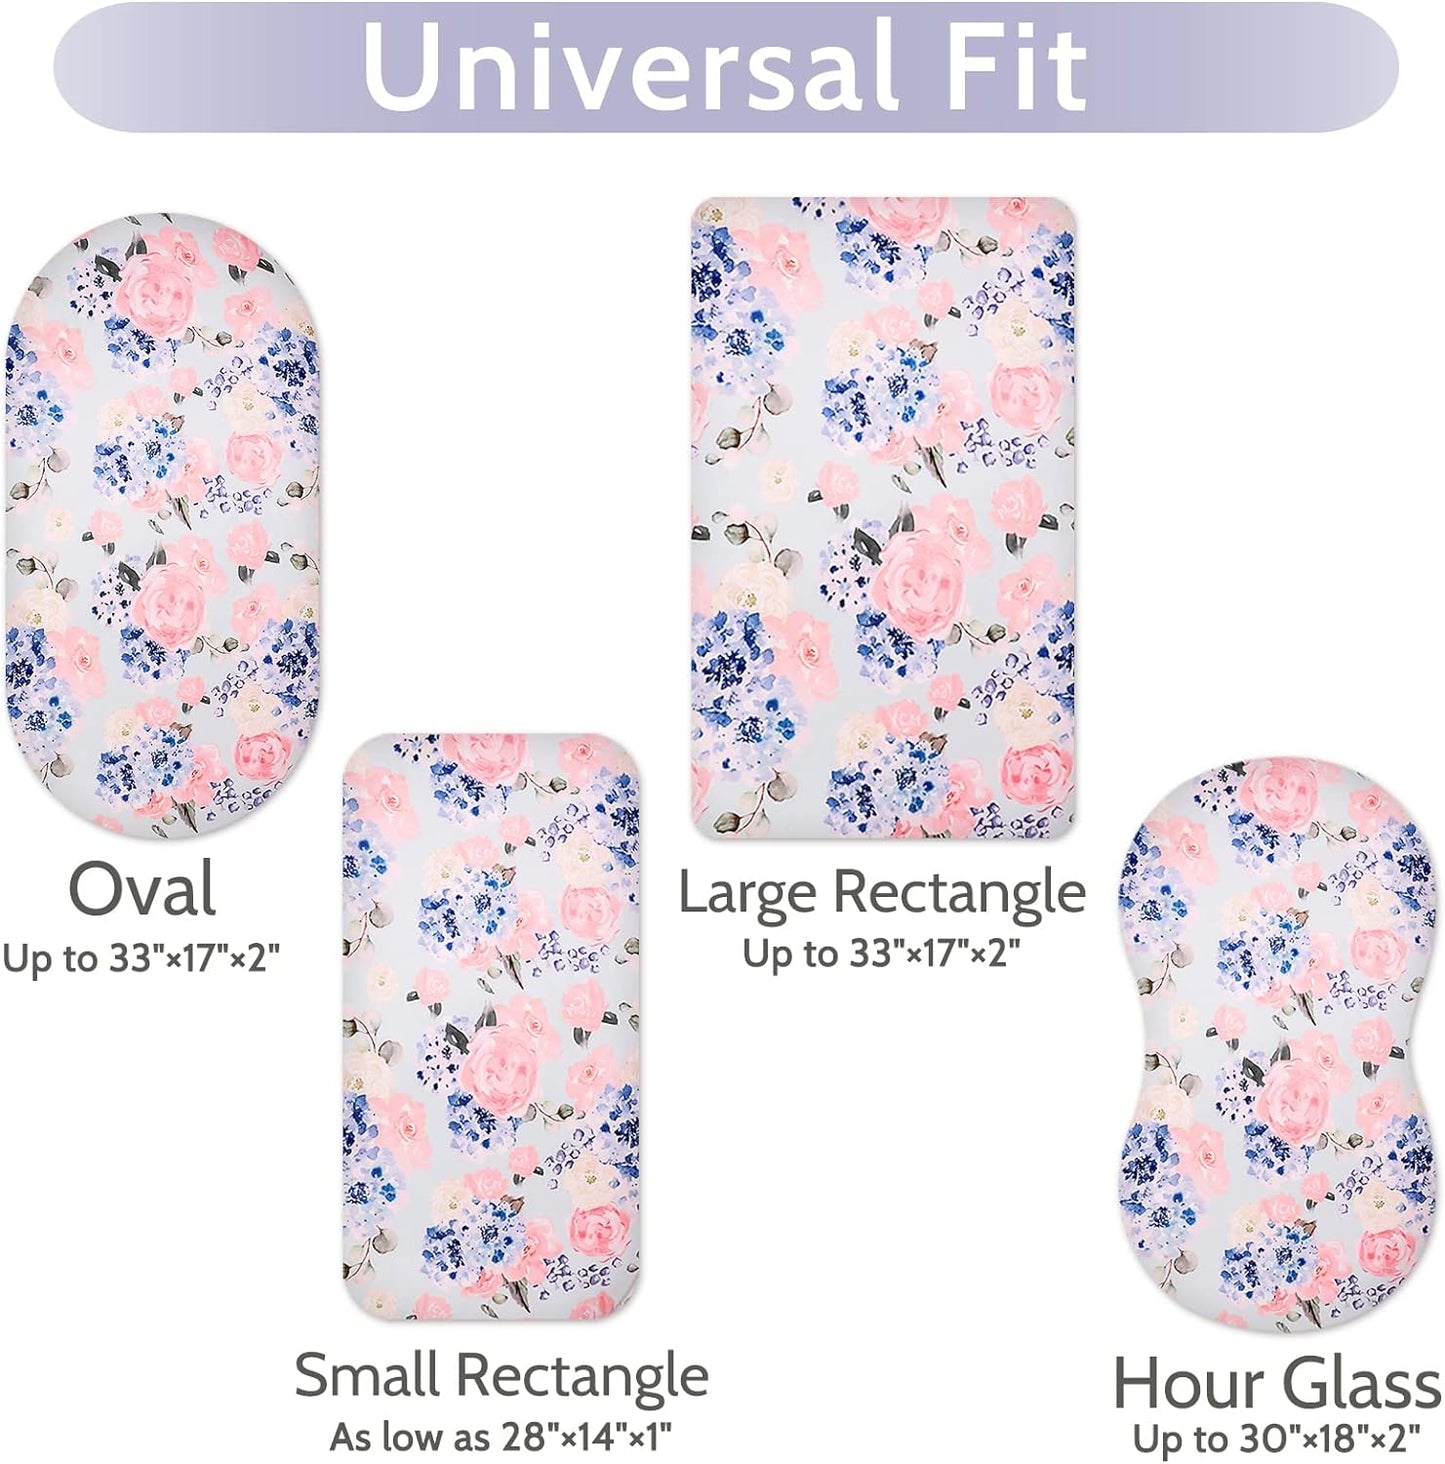 Bassinet Sheets Set for Baby Girl, Stretchy Fitted Newborn Bassinet Sheet, Universal for Oval Rectangle, and Hourglass Bassinet Mattress, Blue and Pink.